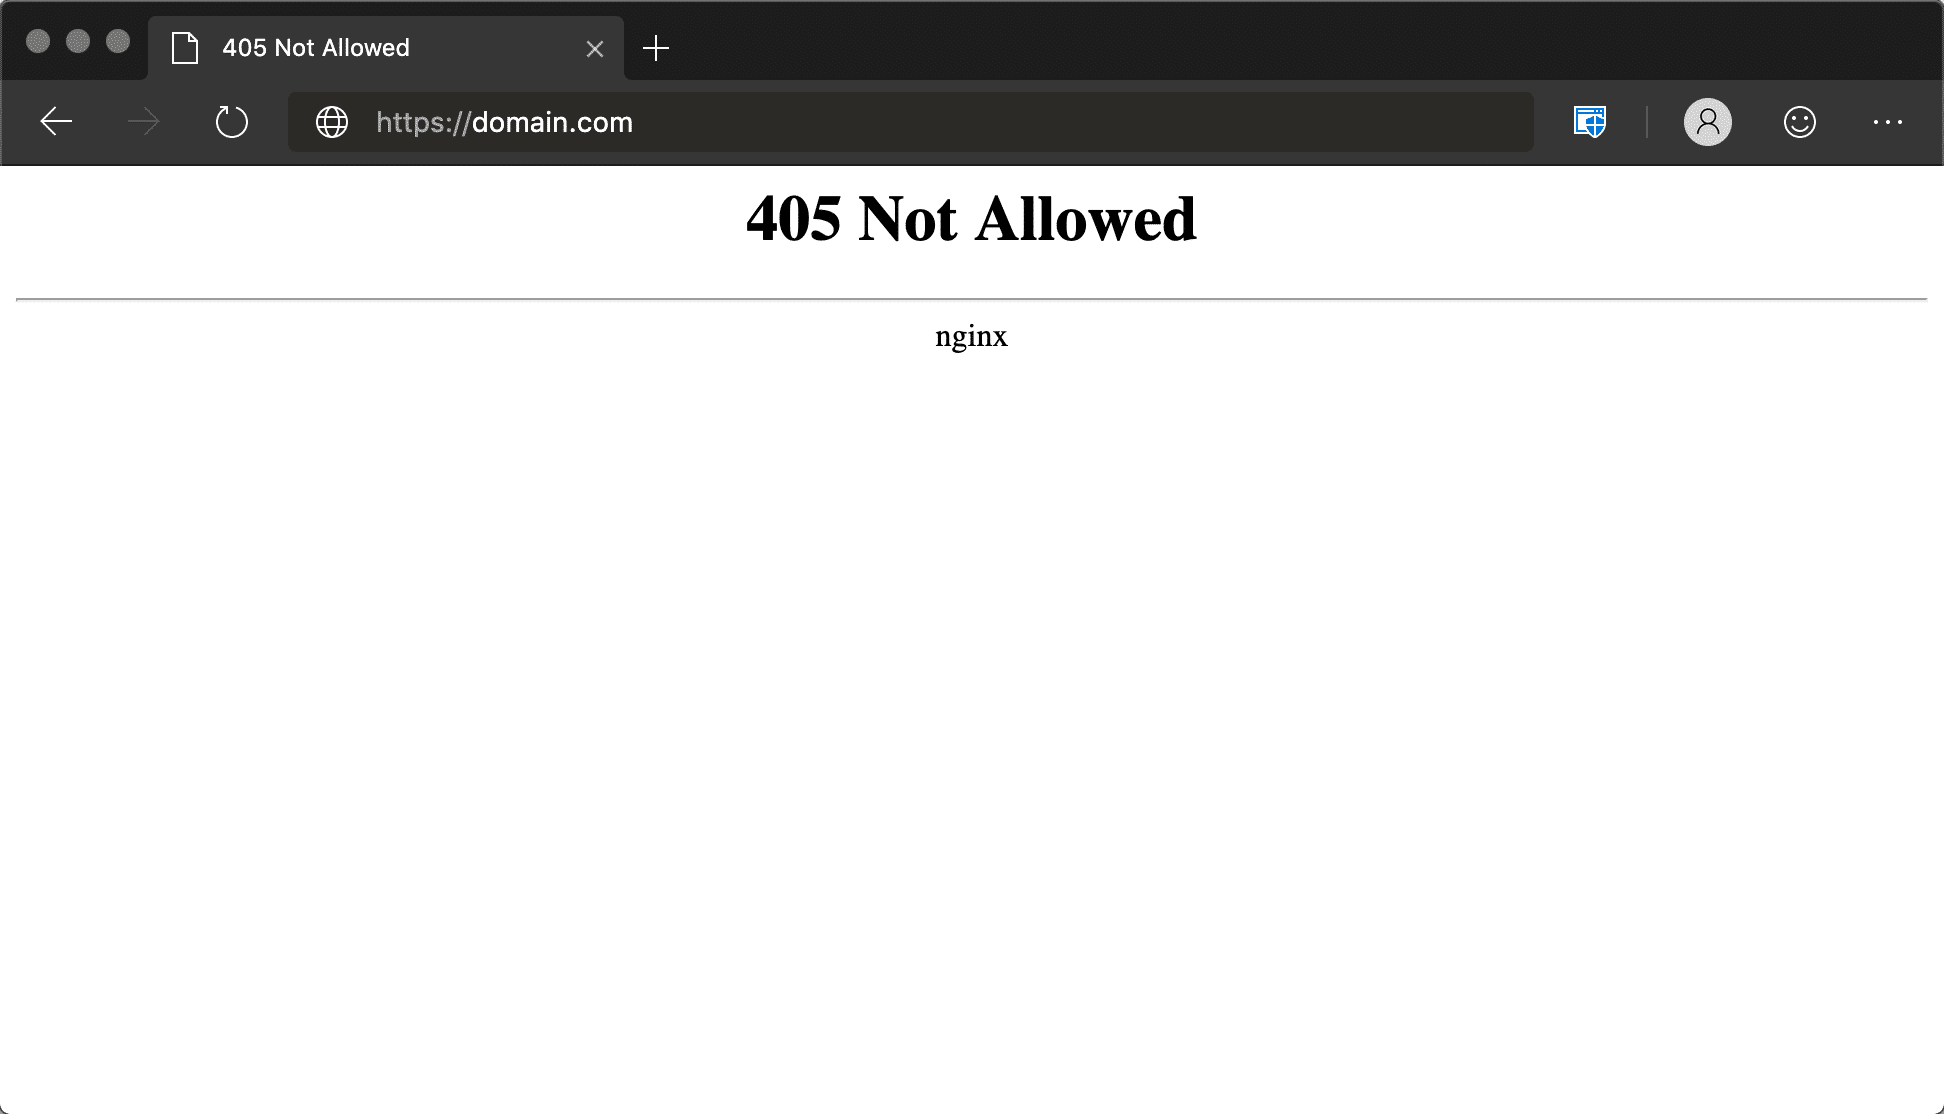 Error 405: request method post not supported